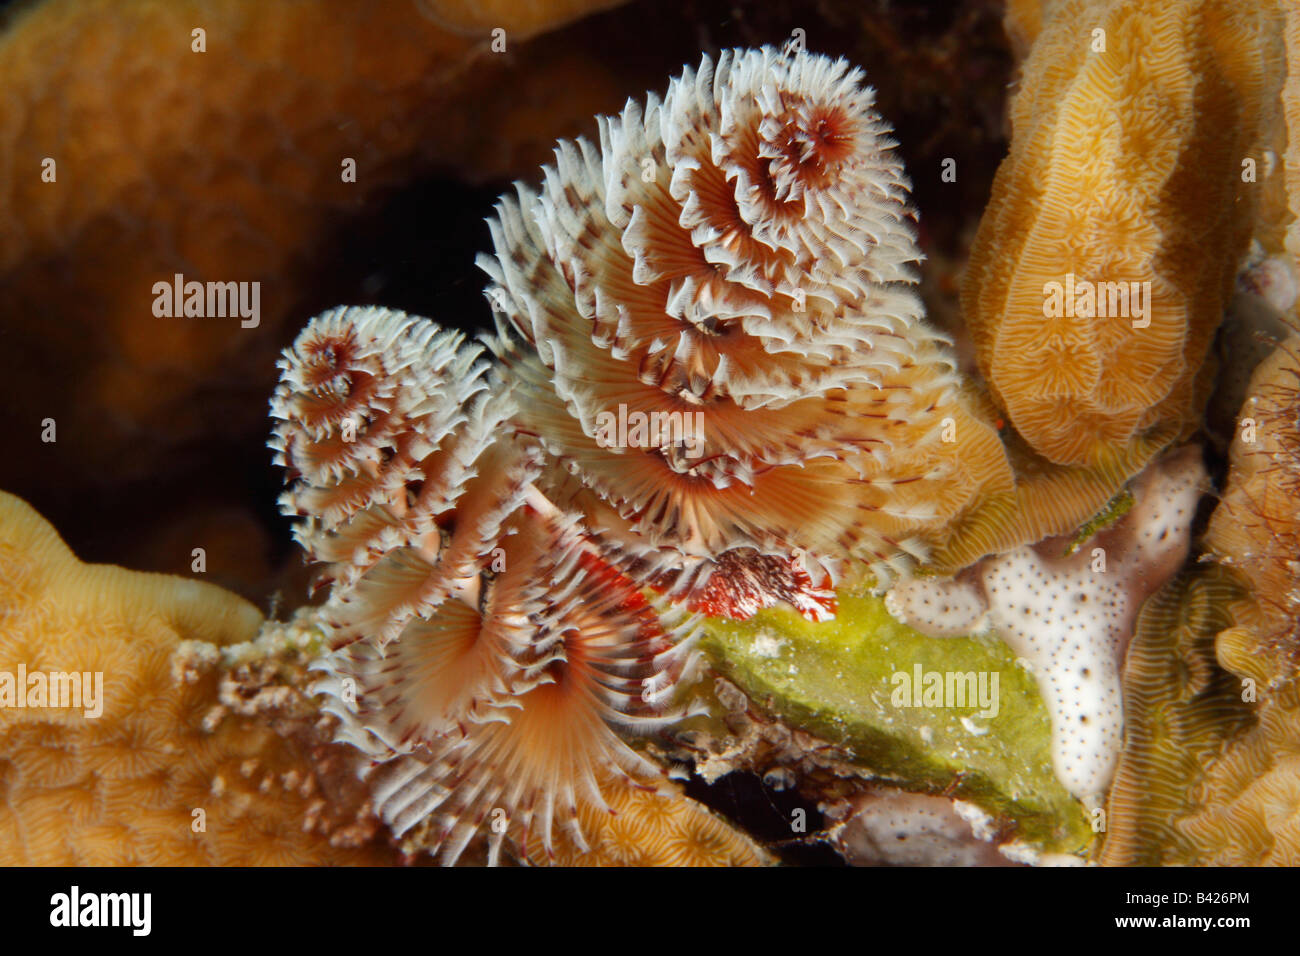 A close-up picture of a Christmas Tree Worm embedded in the surface of Scaled Lettuce Coral Stock Photo